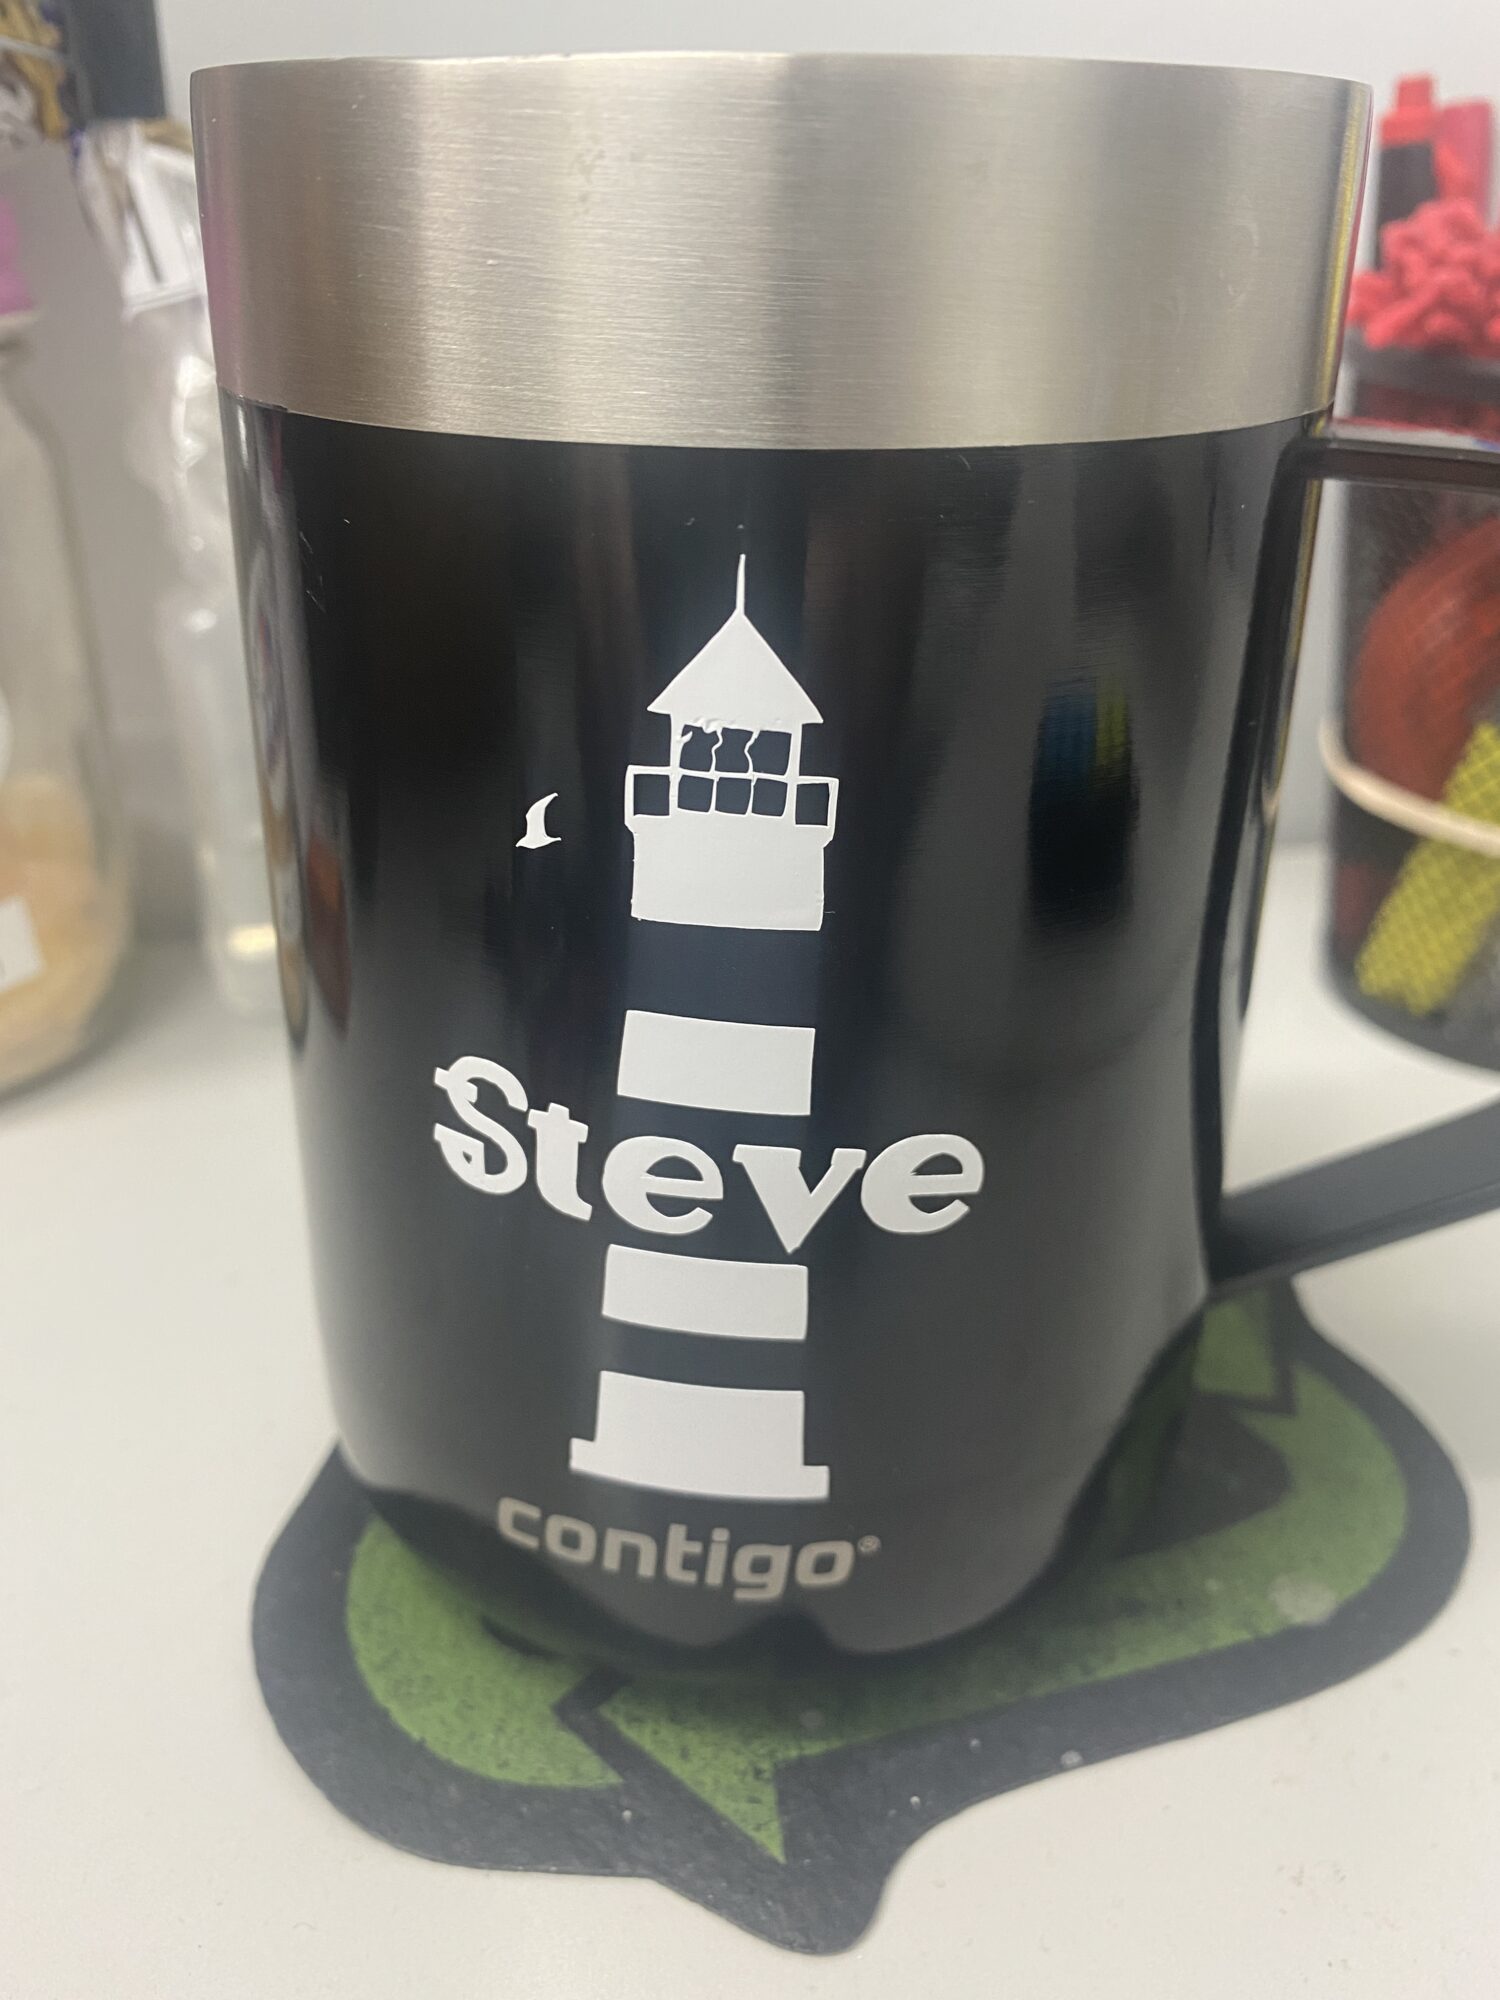 I made this from scrap vinyl from a print shop, scrap came off a yard sign print. #vinyl 
Yes, I know it’s not on straight, this is the leaning lighthouse like the leaning tower of Pisa. #lighthouse #lighthouses #cricut #cricutmade #cricutcrafts #vinylcommunity